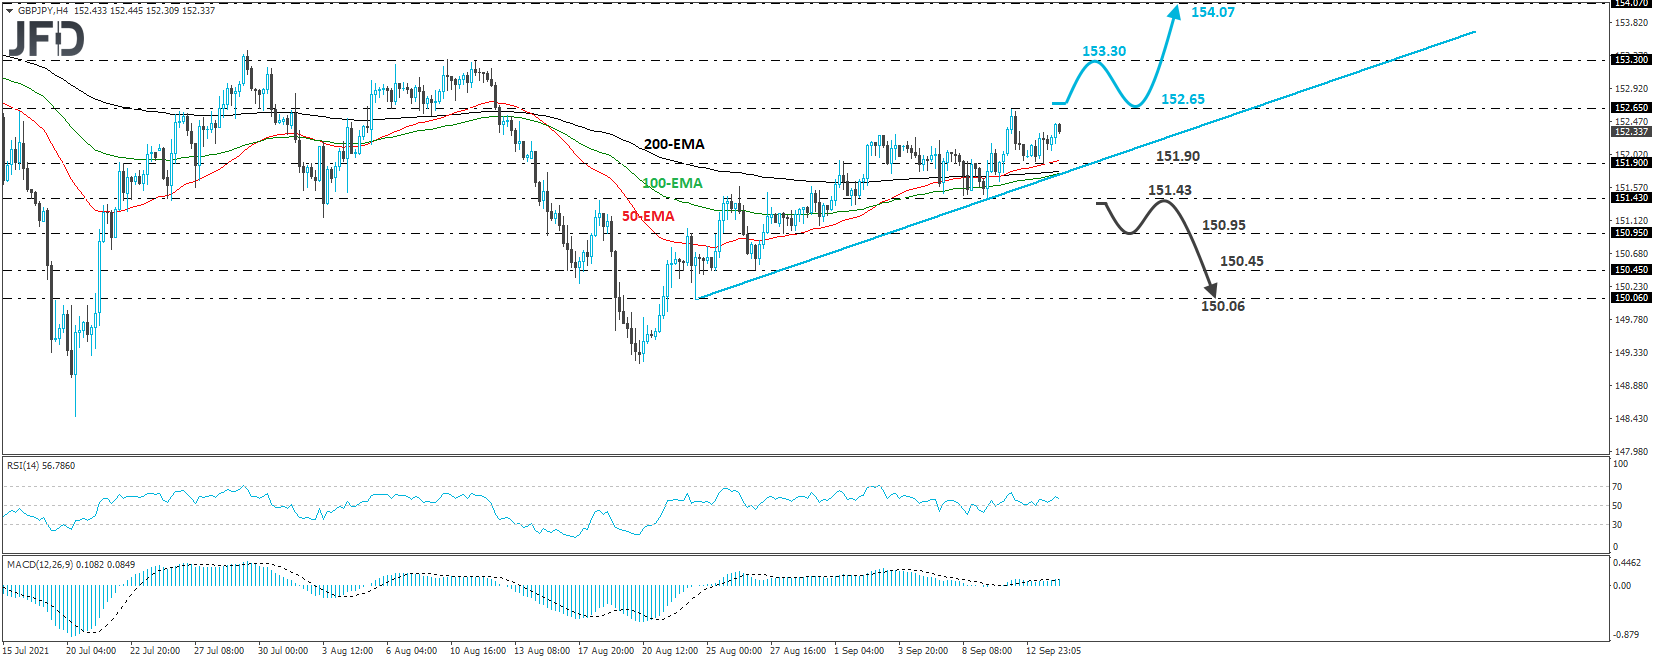 GBP/JPY 4-hour chart technical analysis